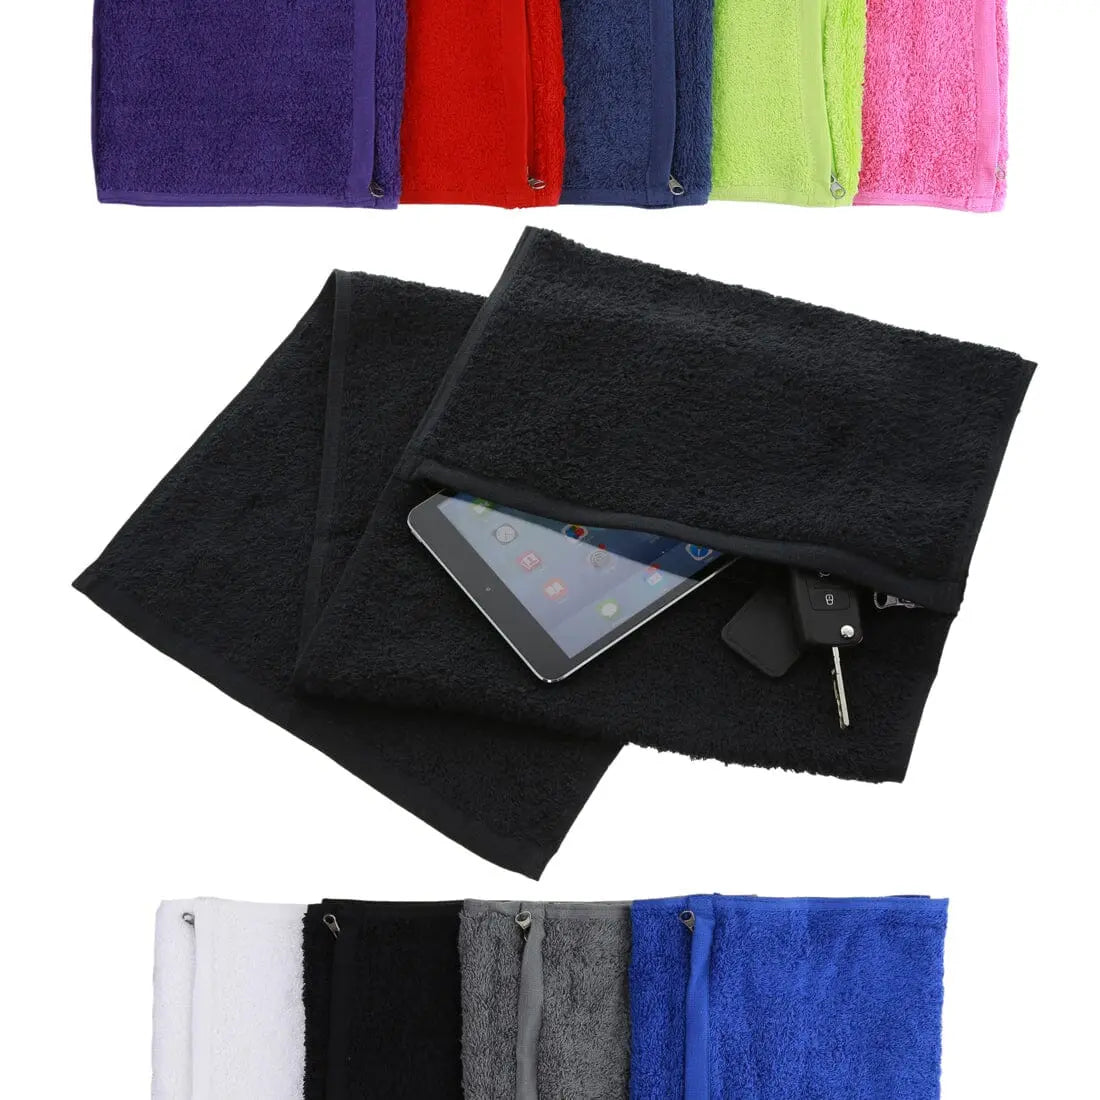 zipped sports towel in black with an ipad and keys in the pocket